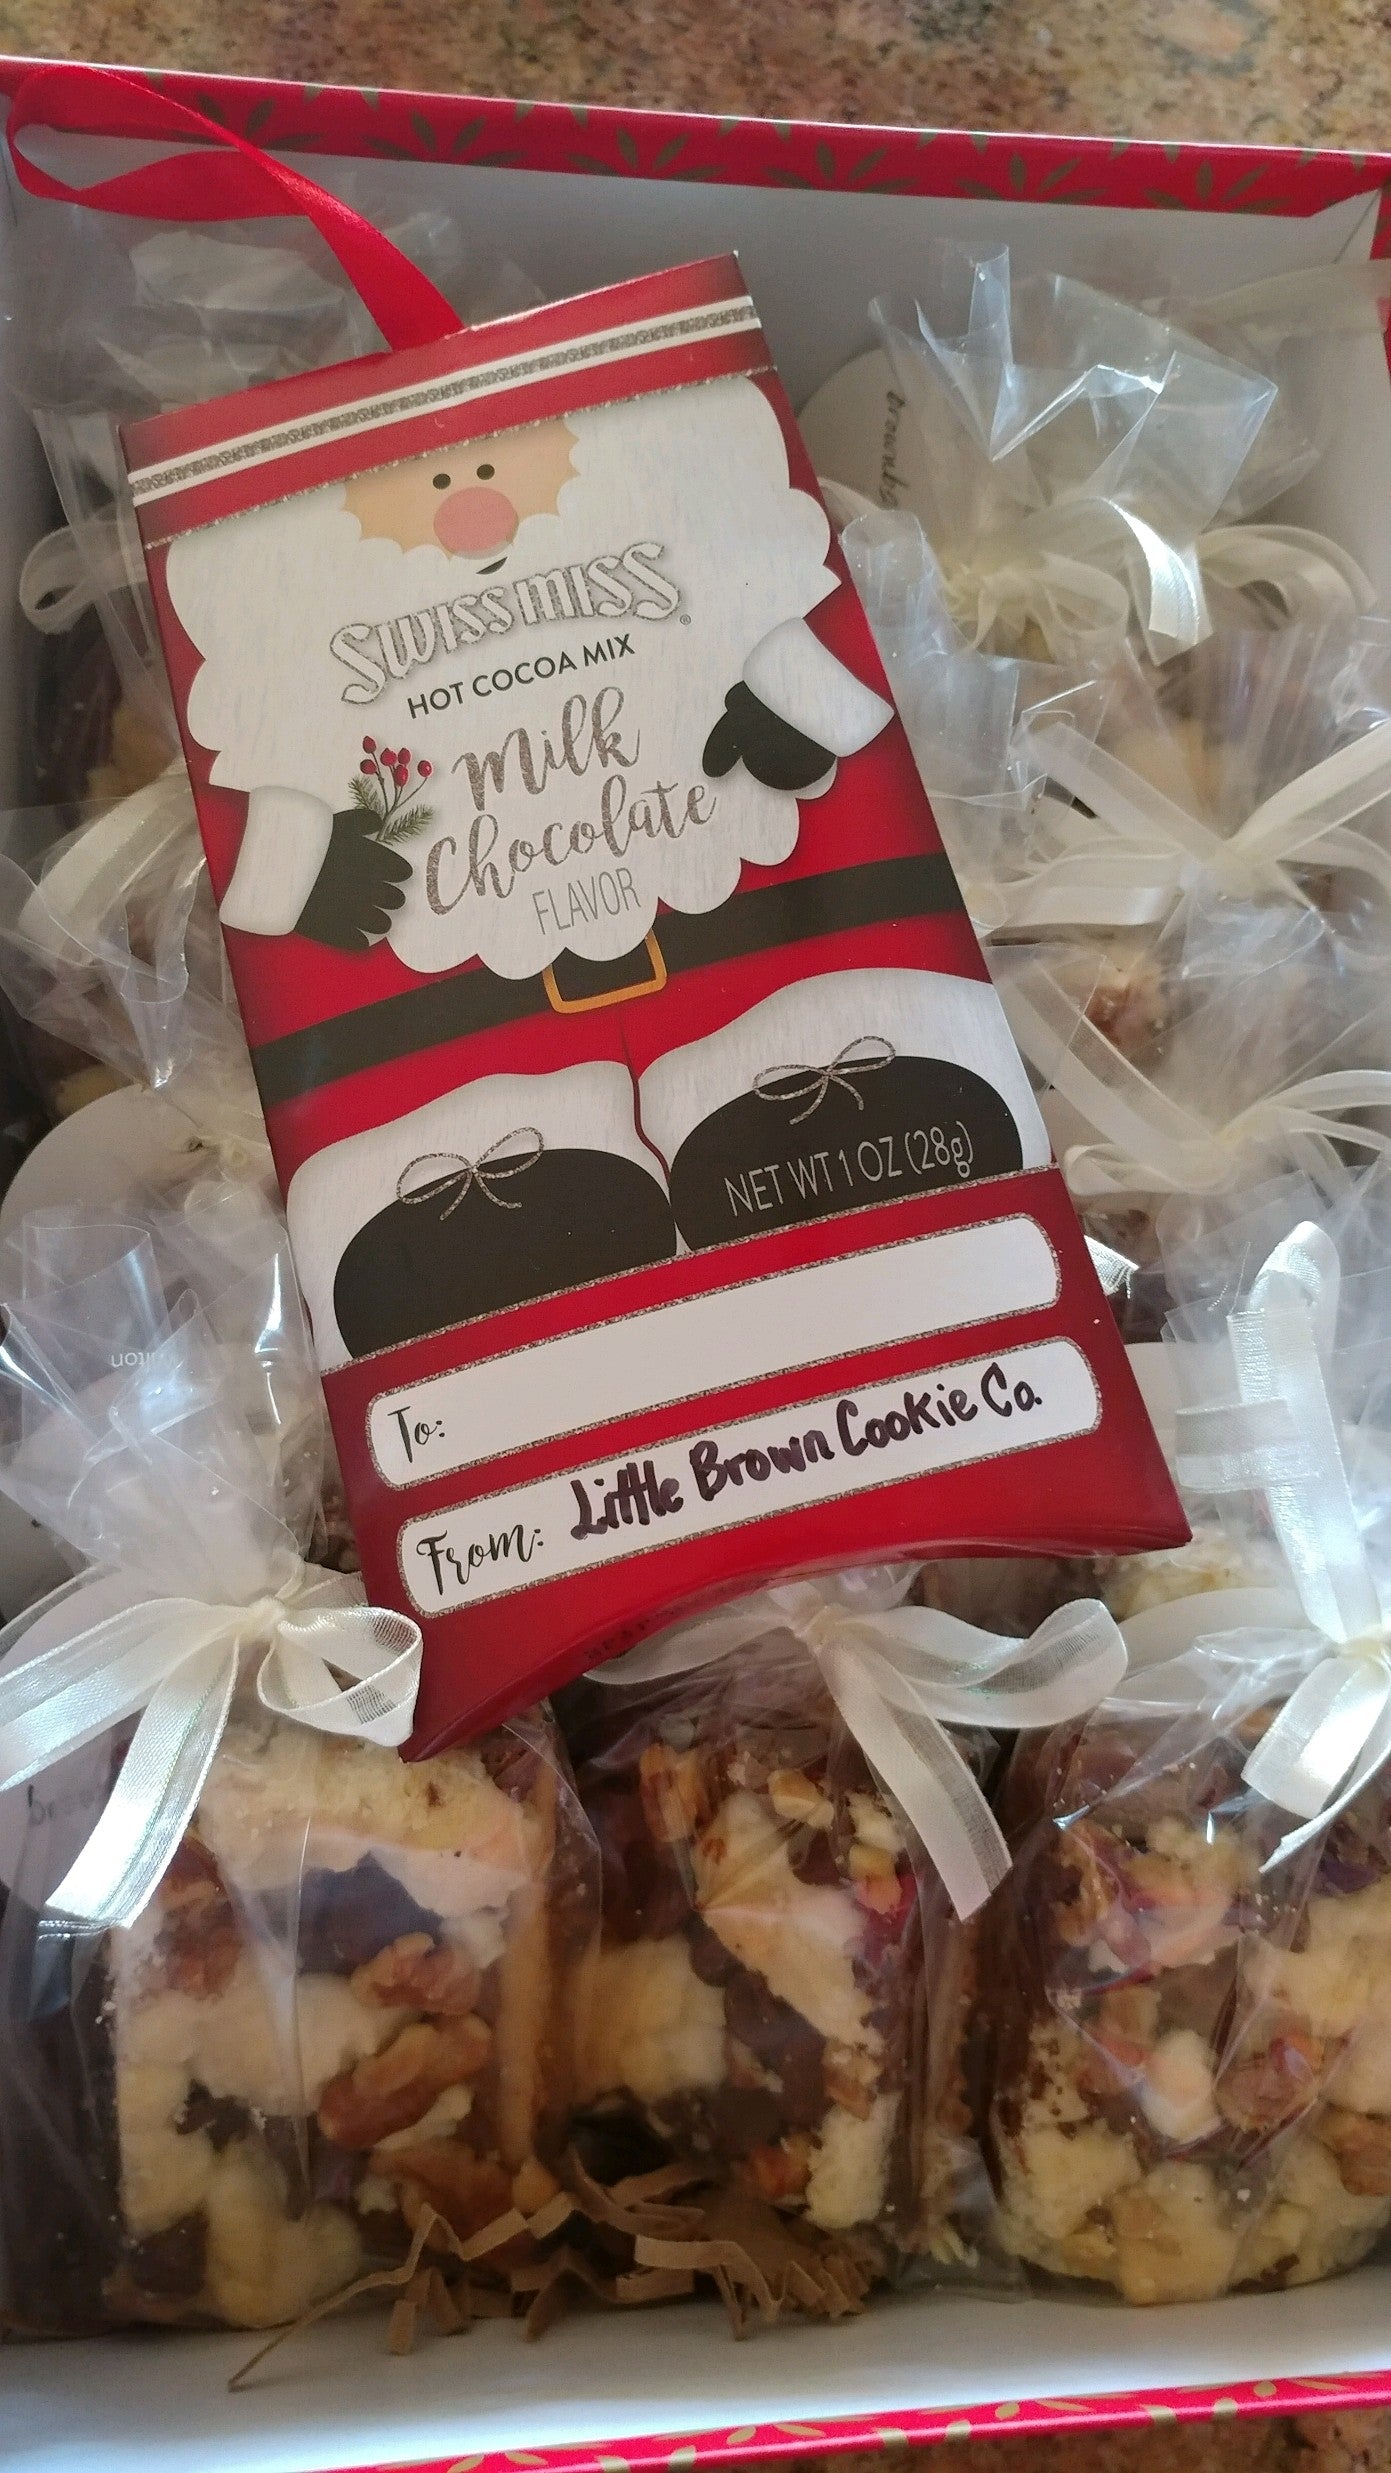 Chocolate crumb bars and a package of Swiss Miss Hot Chocolate mix in a ready to be shipped box